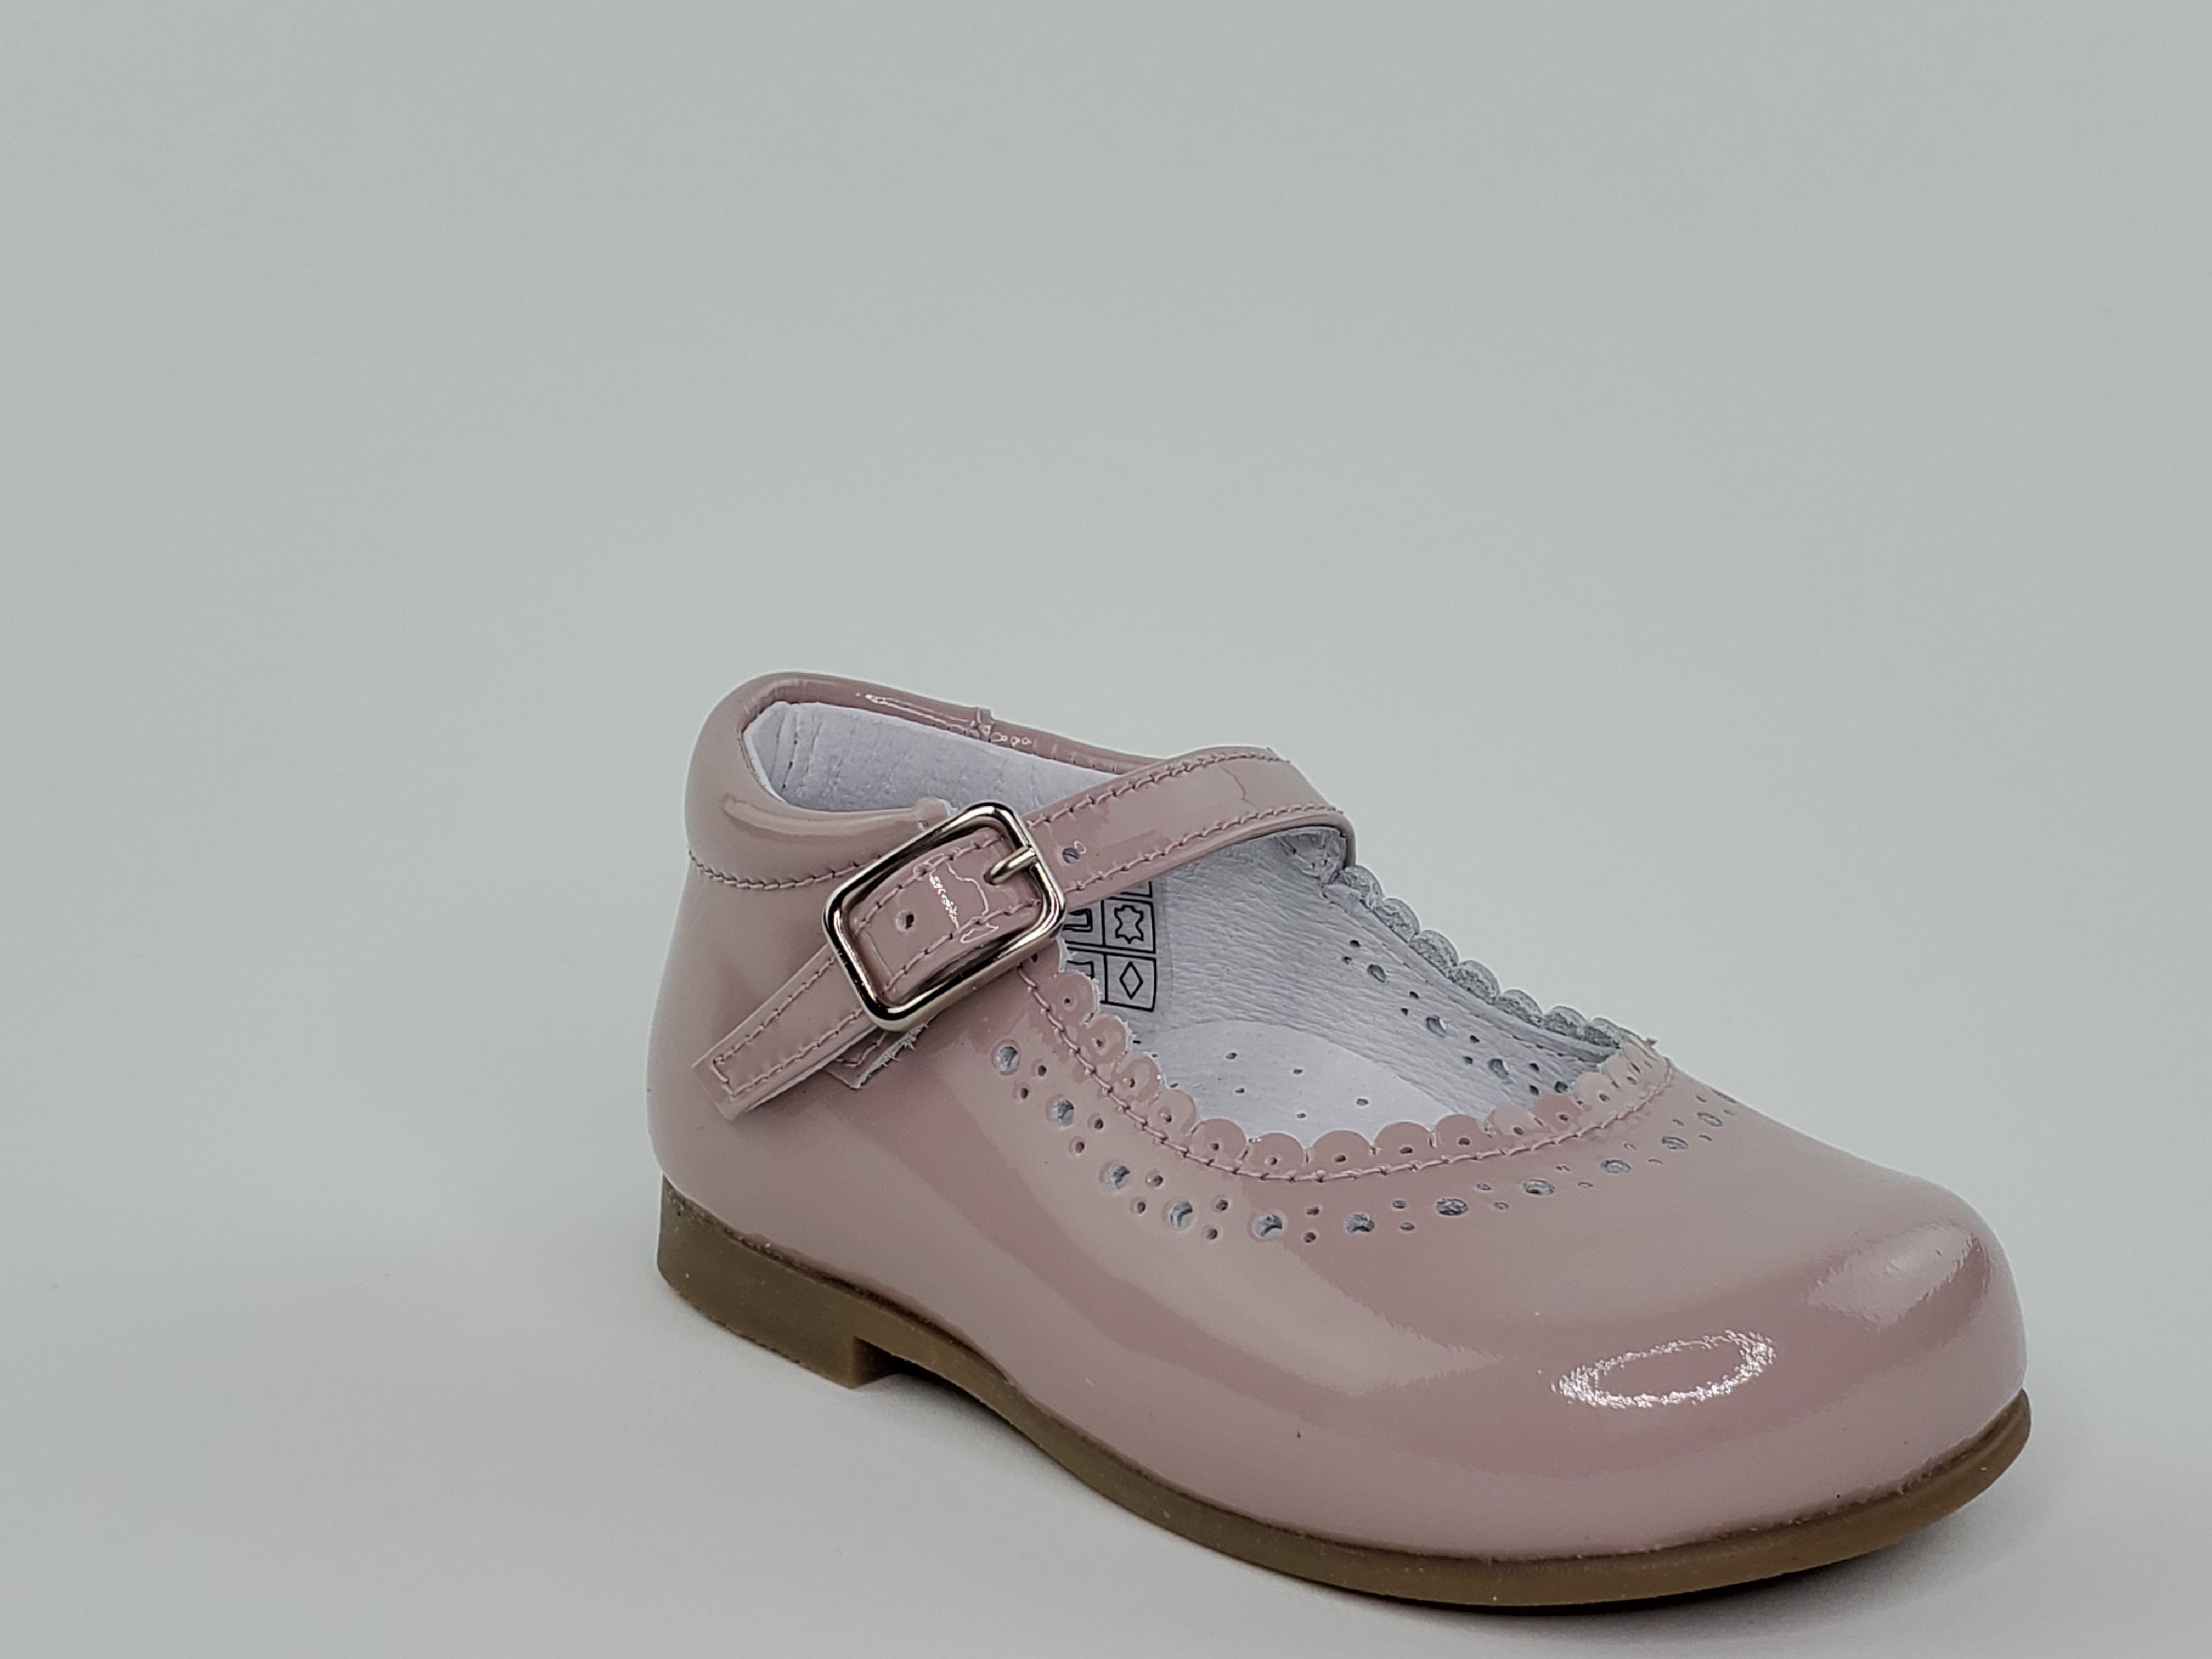 Dusty Pink Rose Patent Scalloped Girl's Mary Jane Shoes-Girl's Shoes- Girl's Shoes Store Girls Shoes Alfa Baby Boutique 